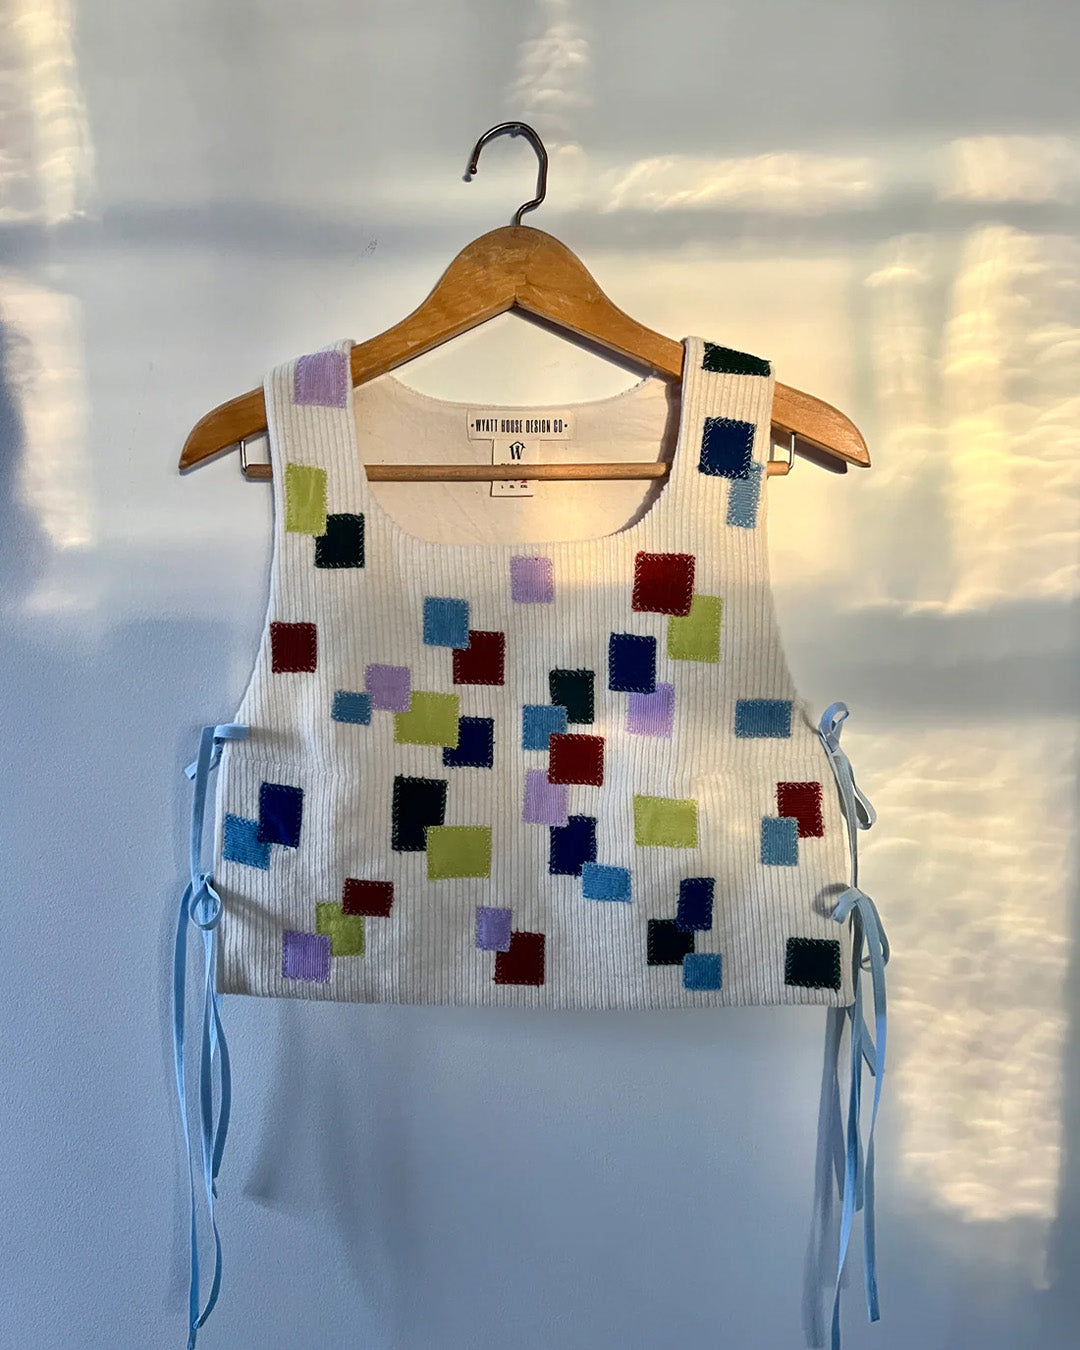 A handwoven top with colorful square patterns displayed on a hanger, bathed in soft light that casts a serene glow, illustrating the seamless blend of vibrant colors and imaginative design in textile art.